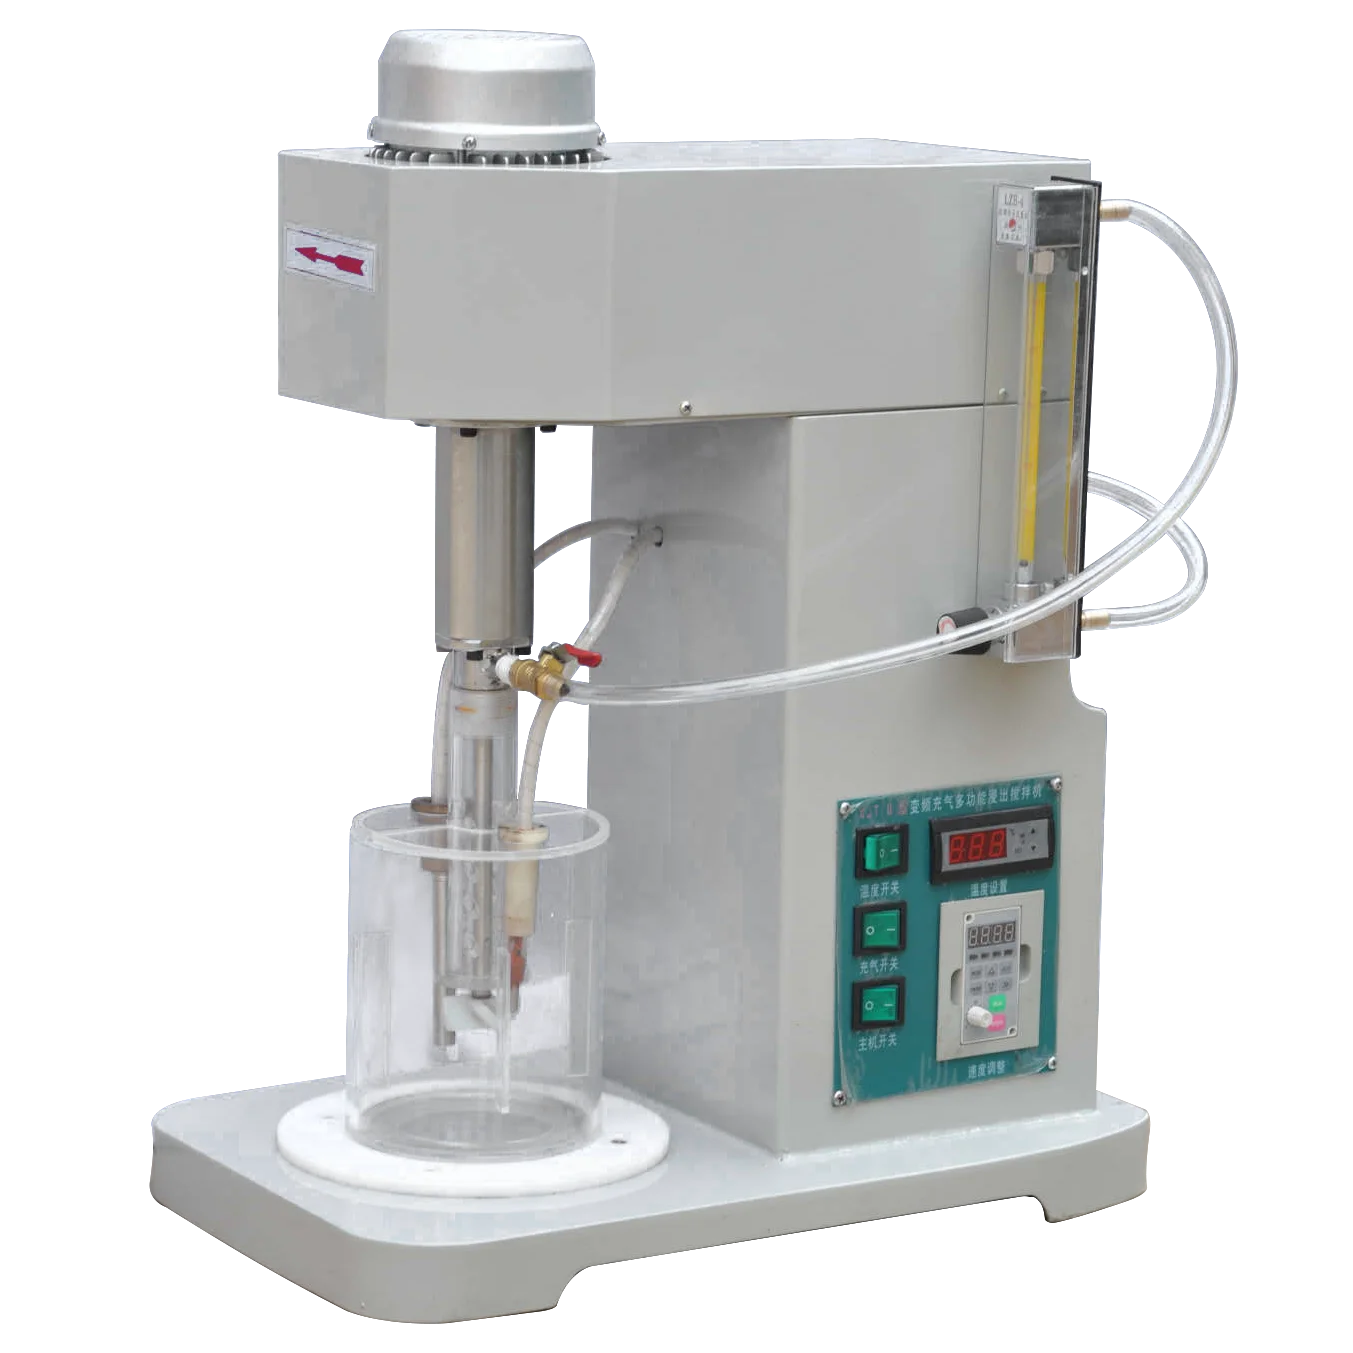 Mineral separation laboratory Flotation Cell, Copper ore Flotation machine for lab